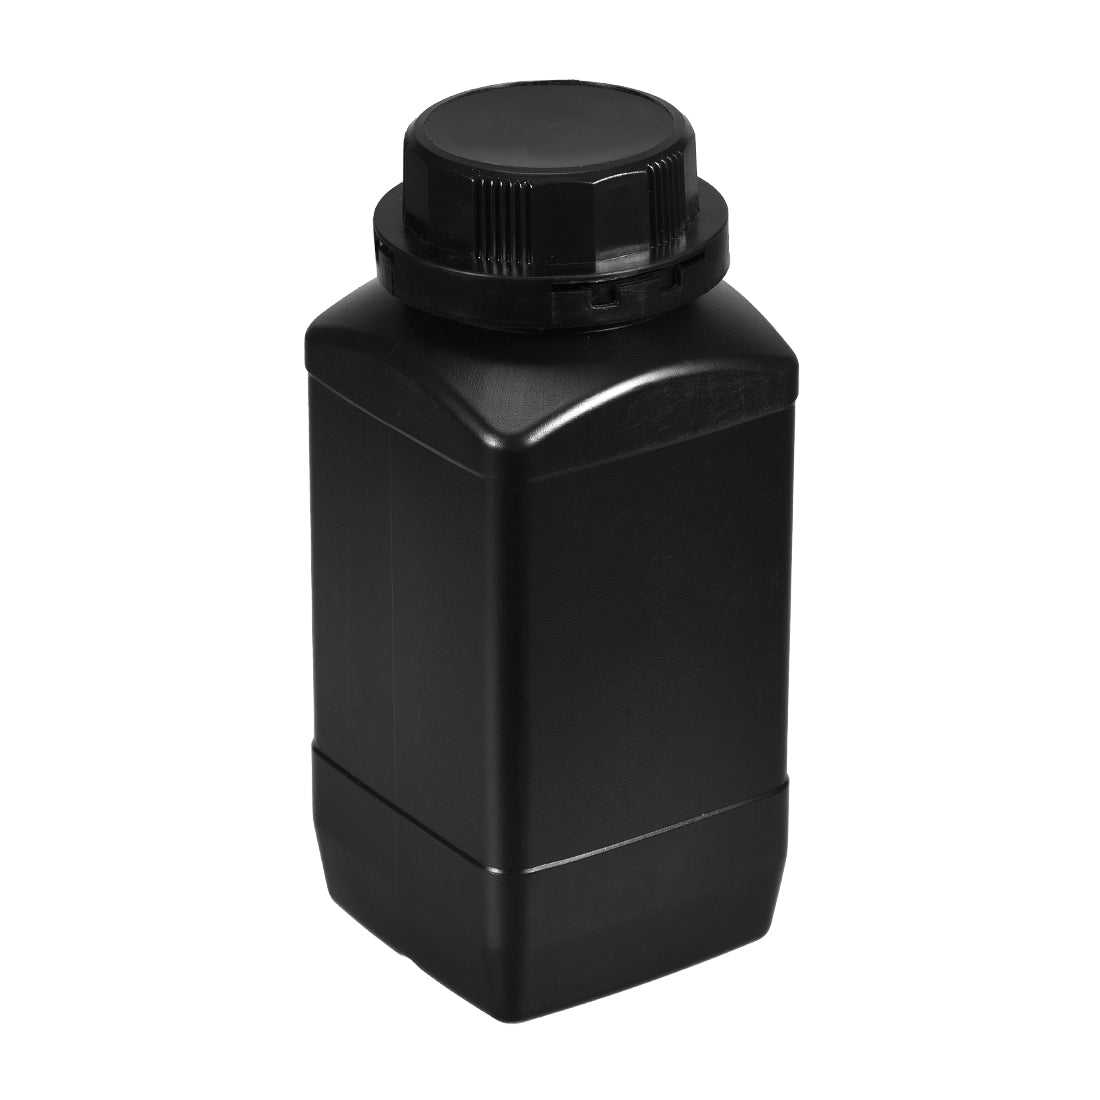 uxcell Uxcell Plastic Lab Chemical Reagent Bottle, 1000ml/ 34oz Wide Mouth Sample Sealing Liquid/Solid Storage Bottles, Black